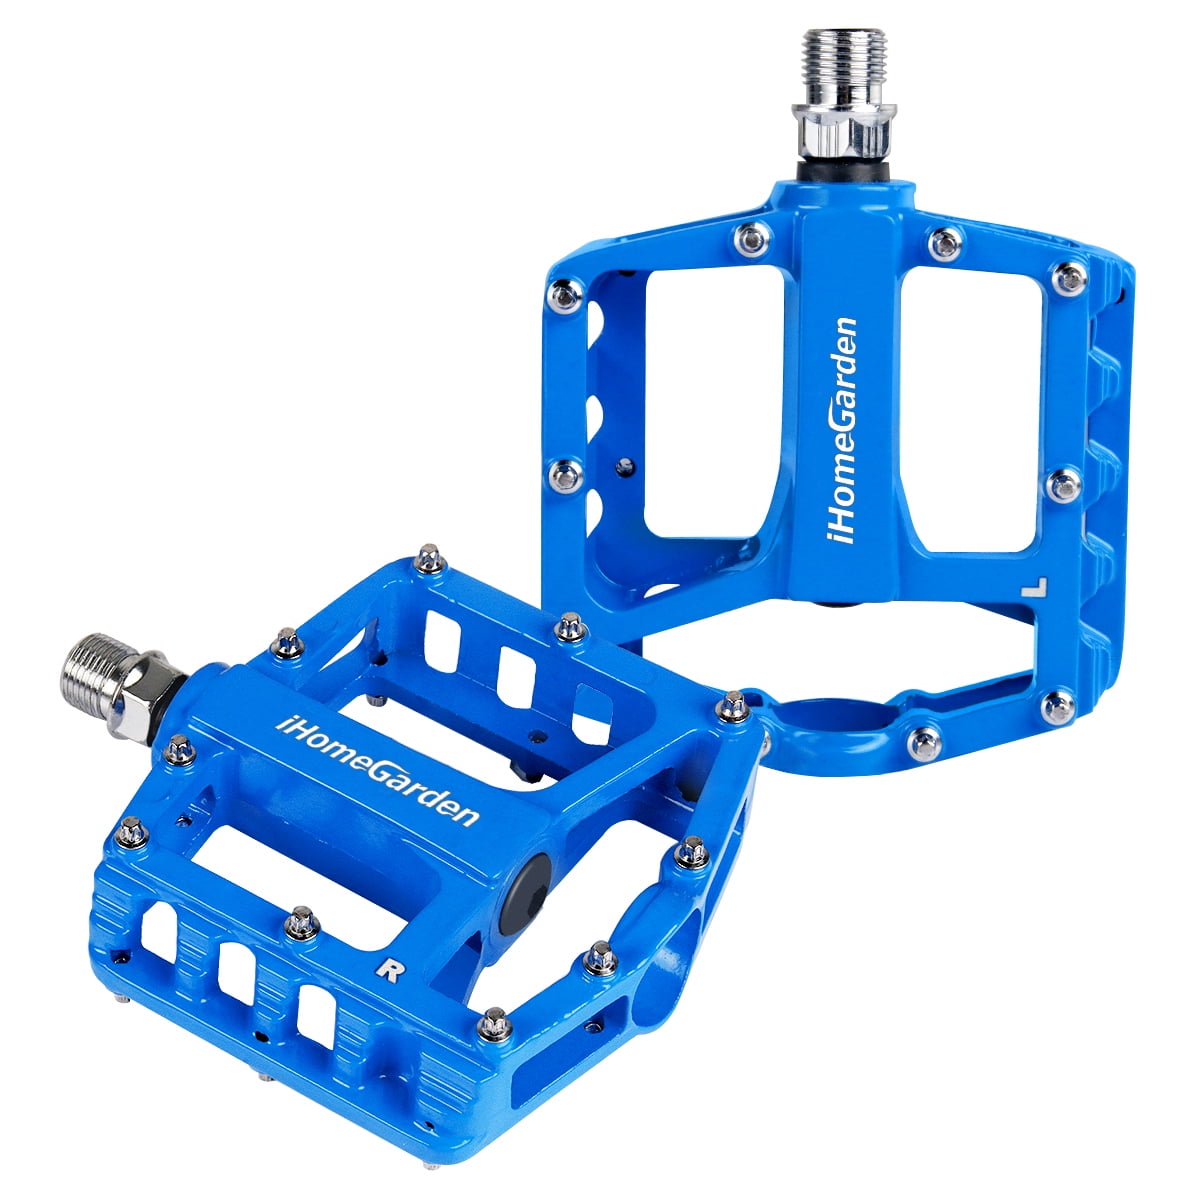 2pc Mountain Bike Pedal Alloy Sealed Bearing Pedals Bicycle Part fit for Cycling